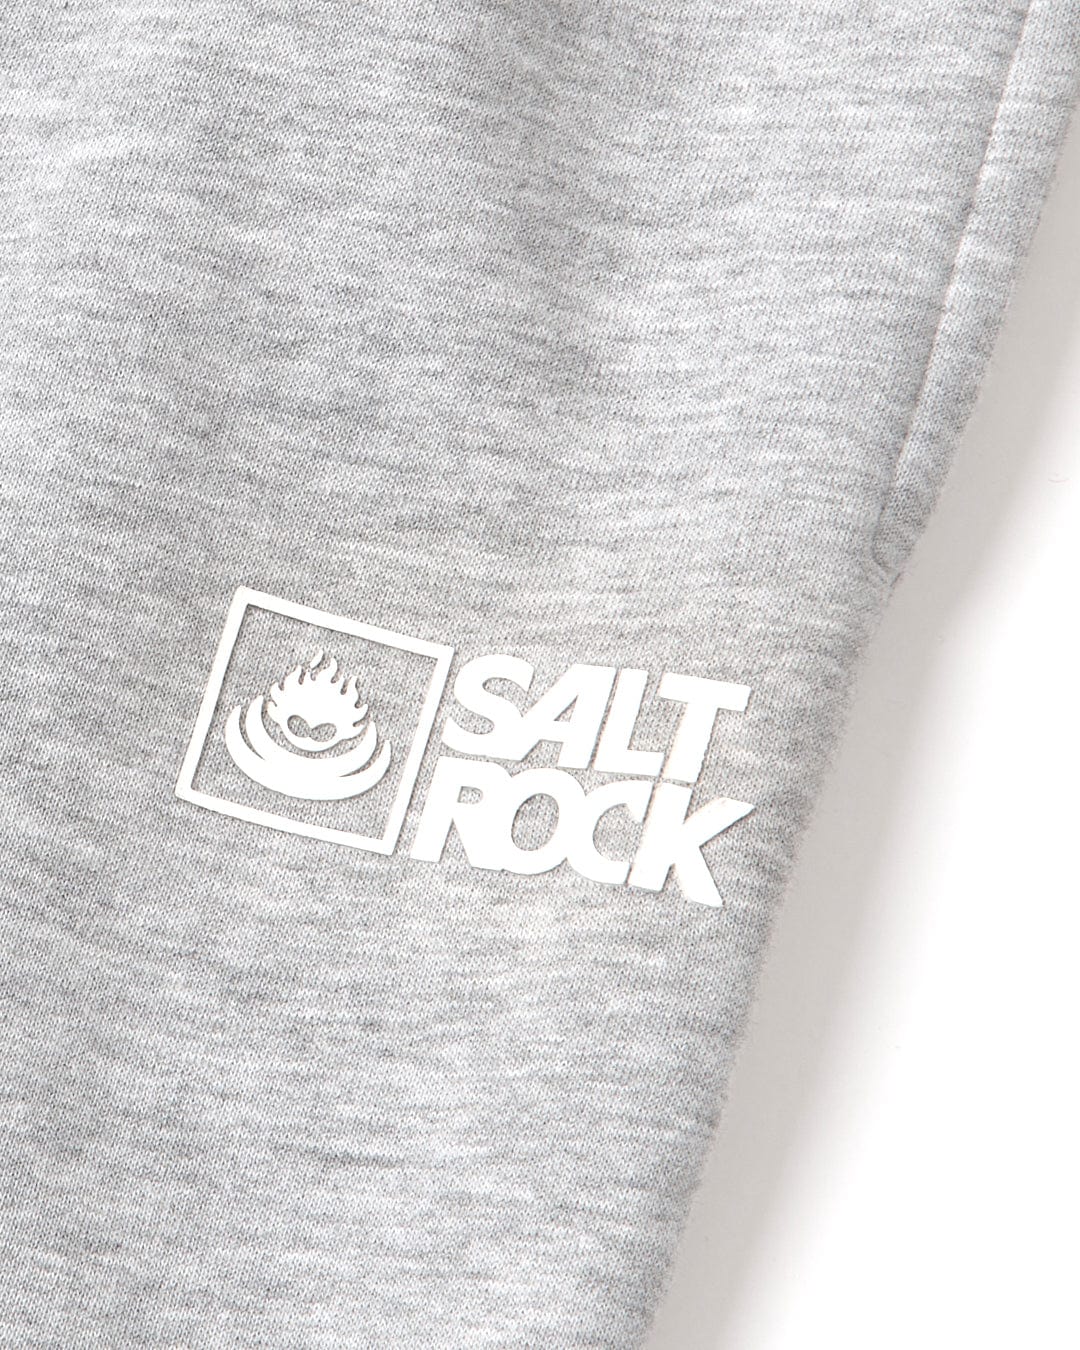 A close-up of a grey fabric with a Saltrock Original - Mens Joggers - Grey logo and a stylized flame above it.